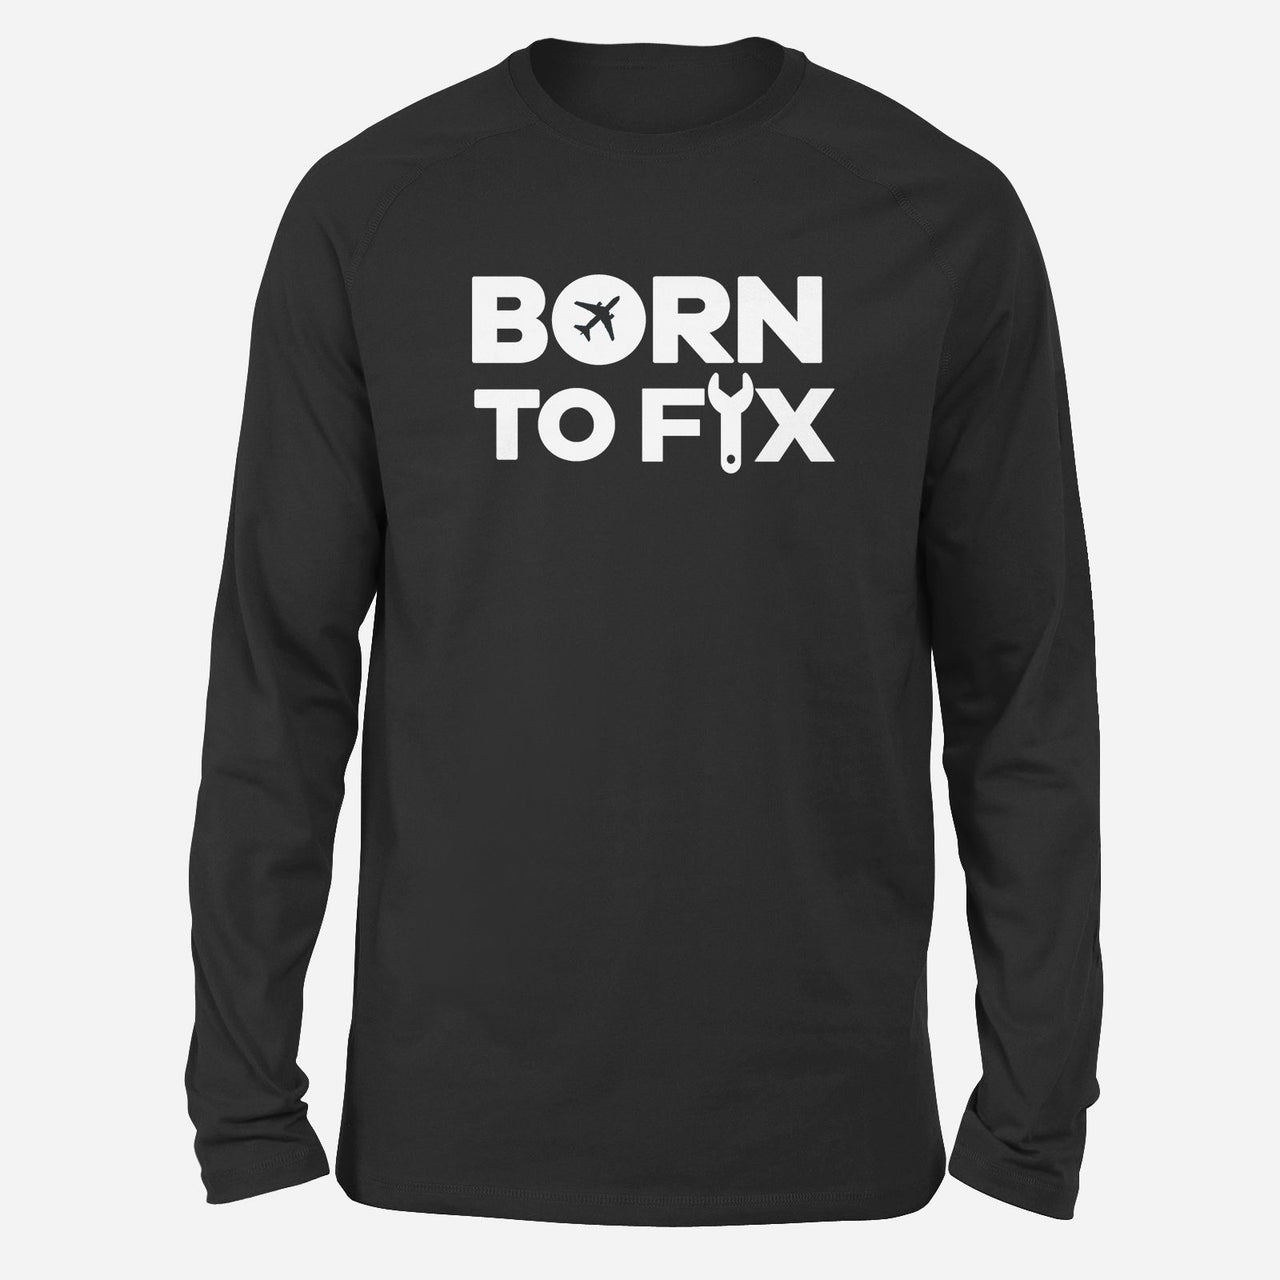 Born To Fix Airplanes Designed Long-Sleeve T-Shirts